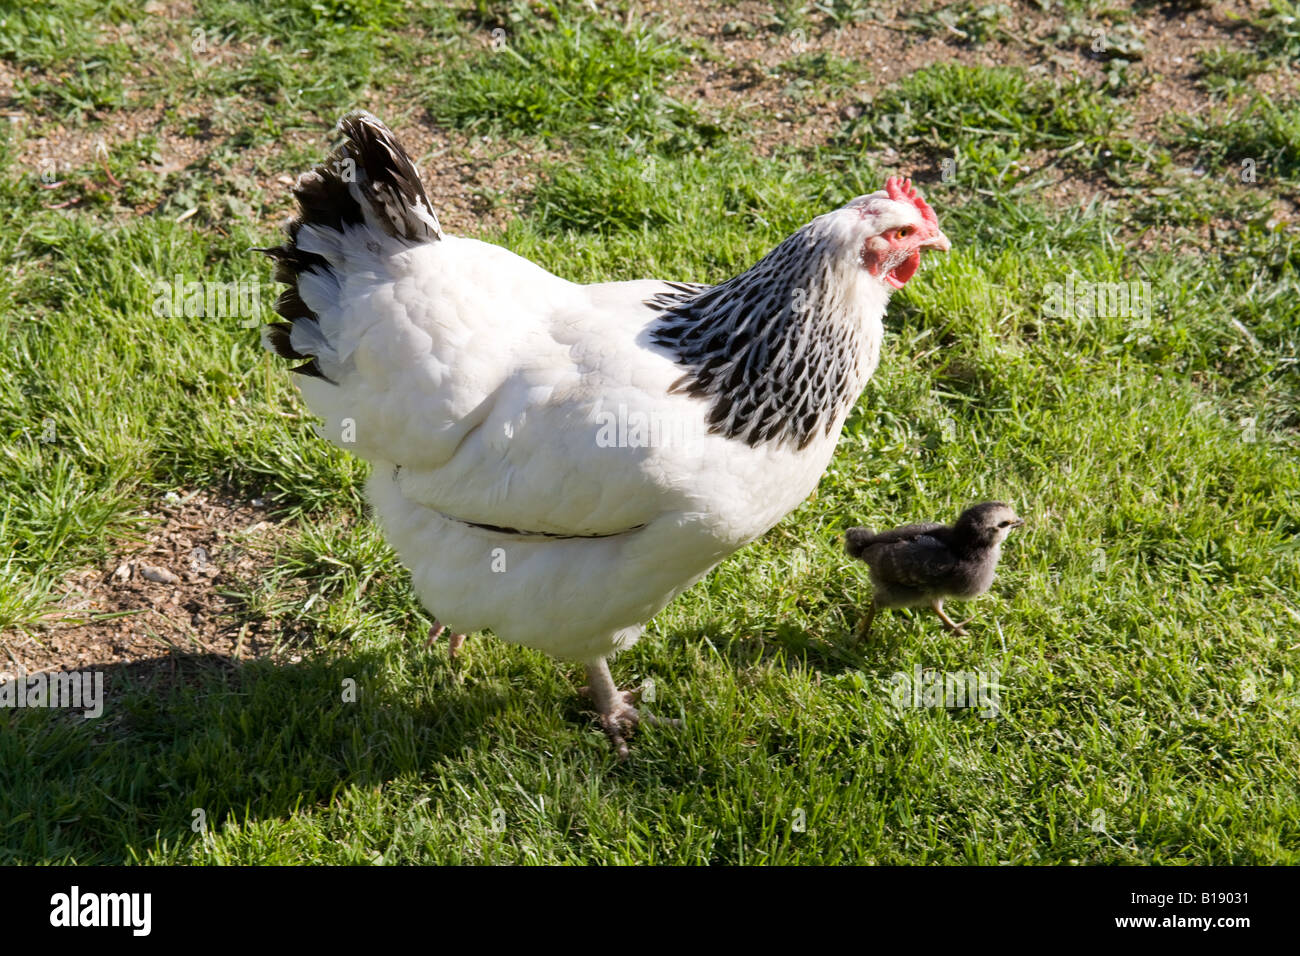 Baby chickens chick and mother hen, Hampshire England Stock Photo